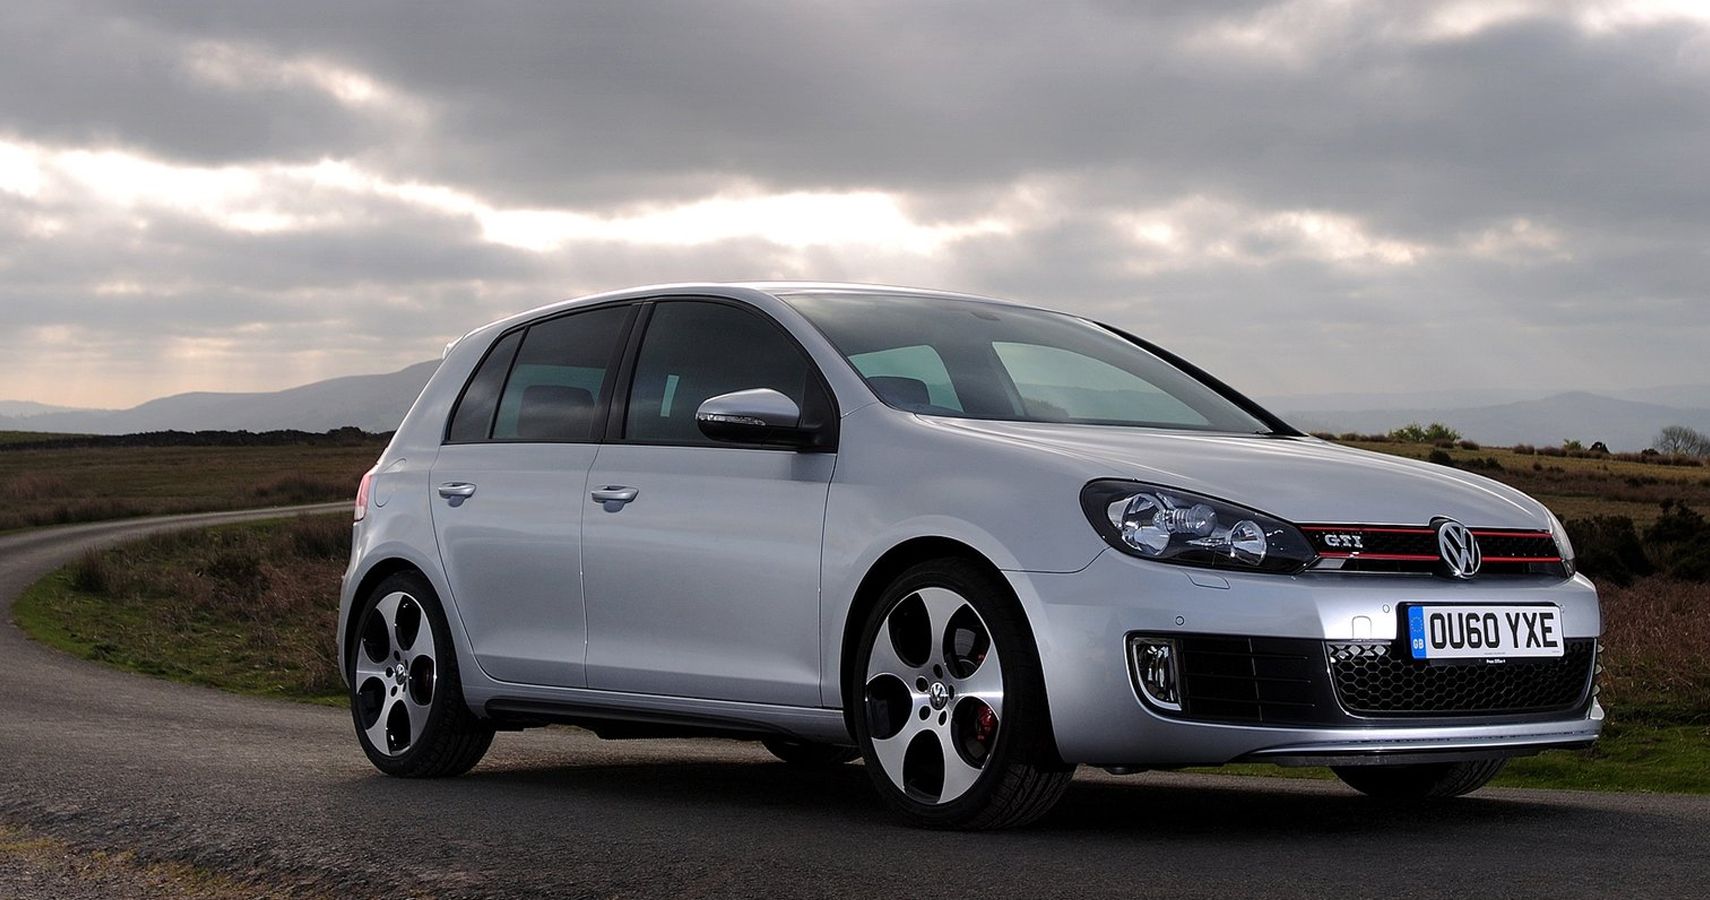 2010-2014 Volkswagen GTI (Mk6): Prices, Specs, And Features